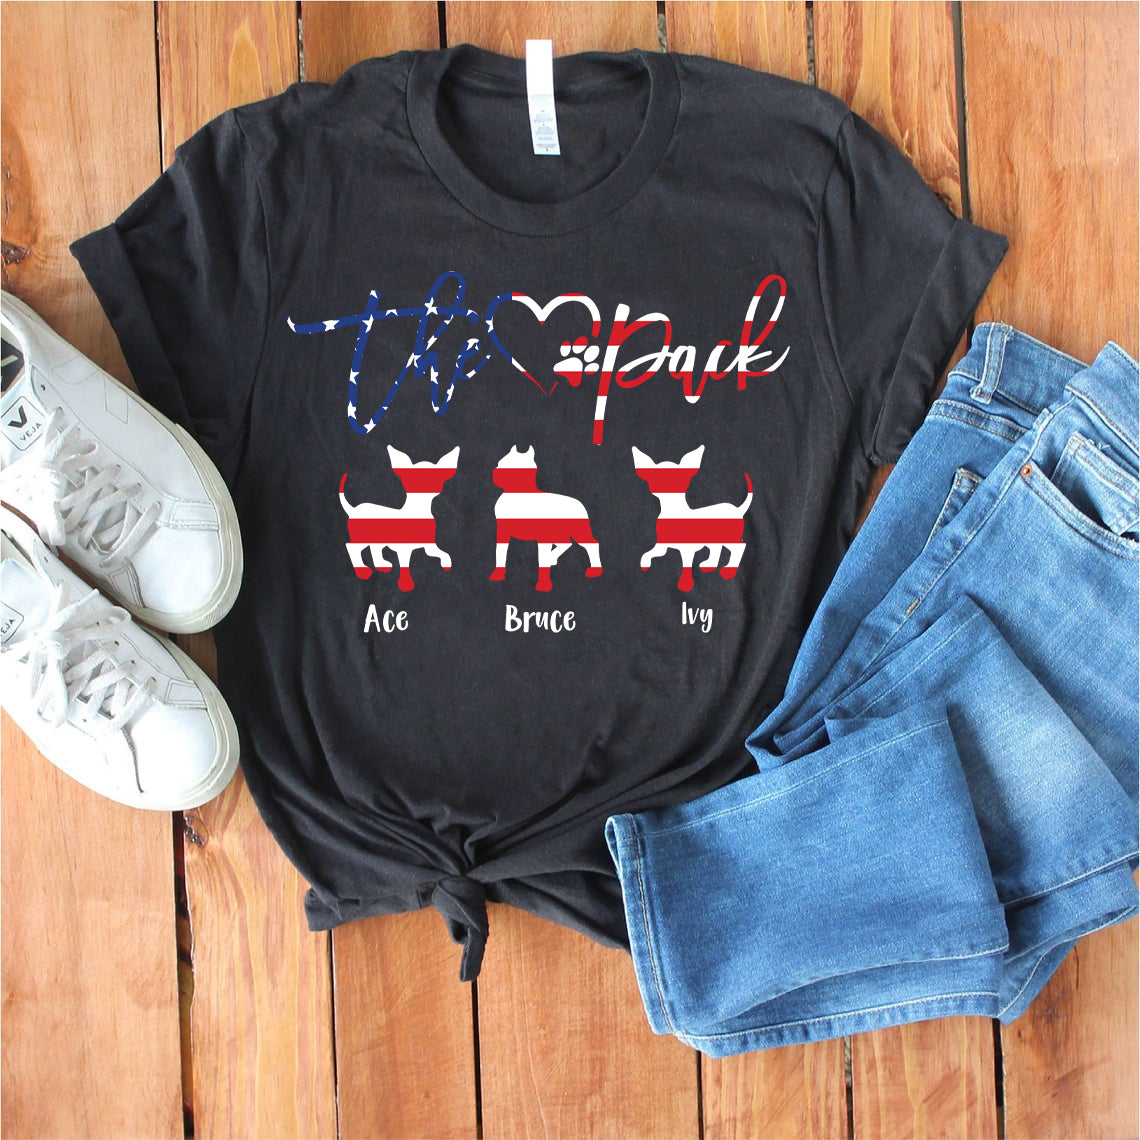 Personalized Dog Name Patriotic US Flag 4th Of July Tshirt